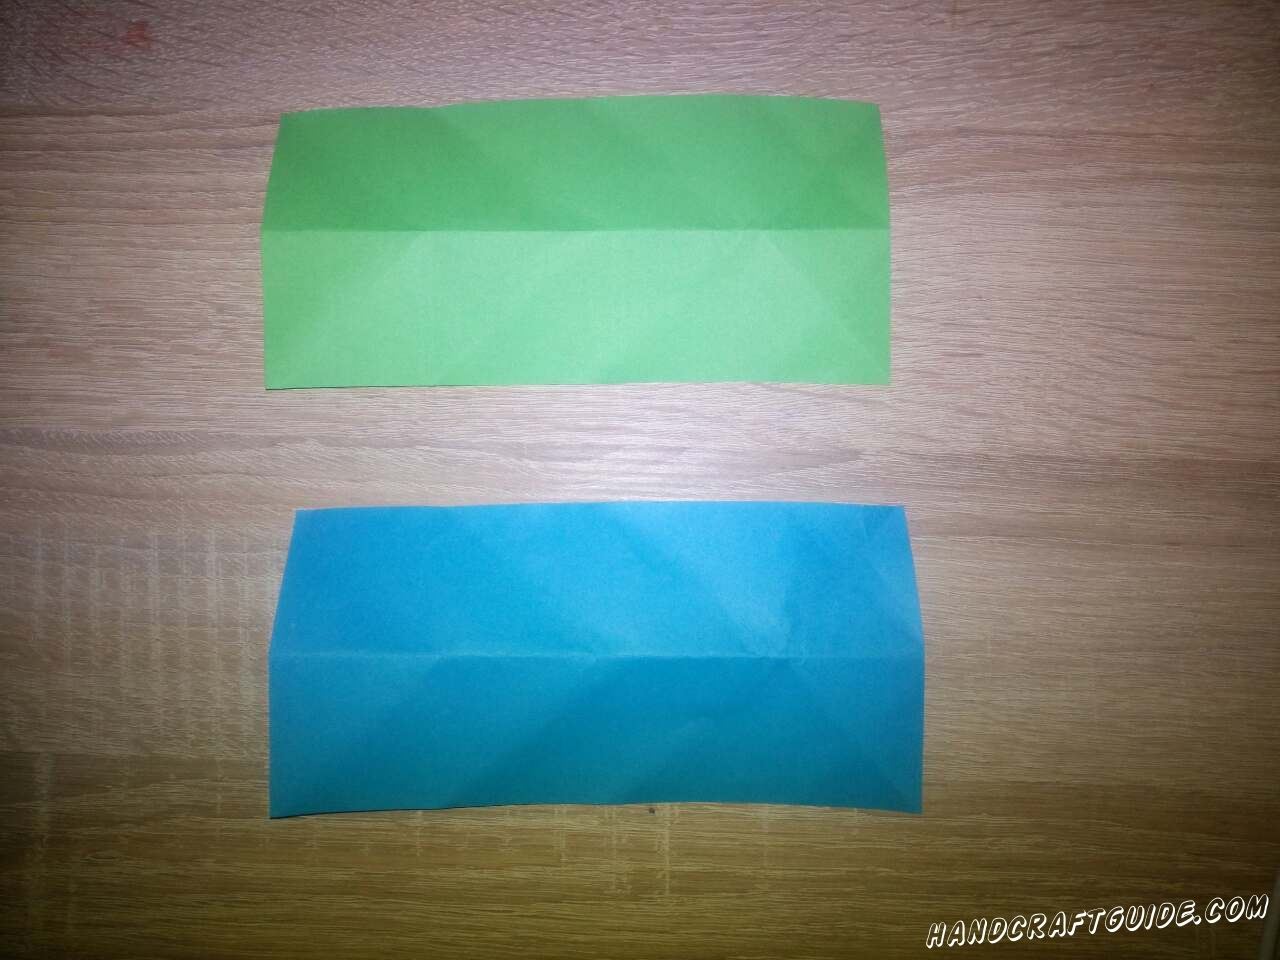 Cut two rectangles out of colored paper.